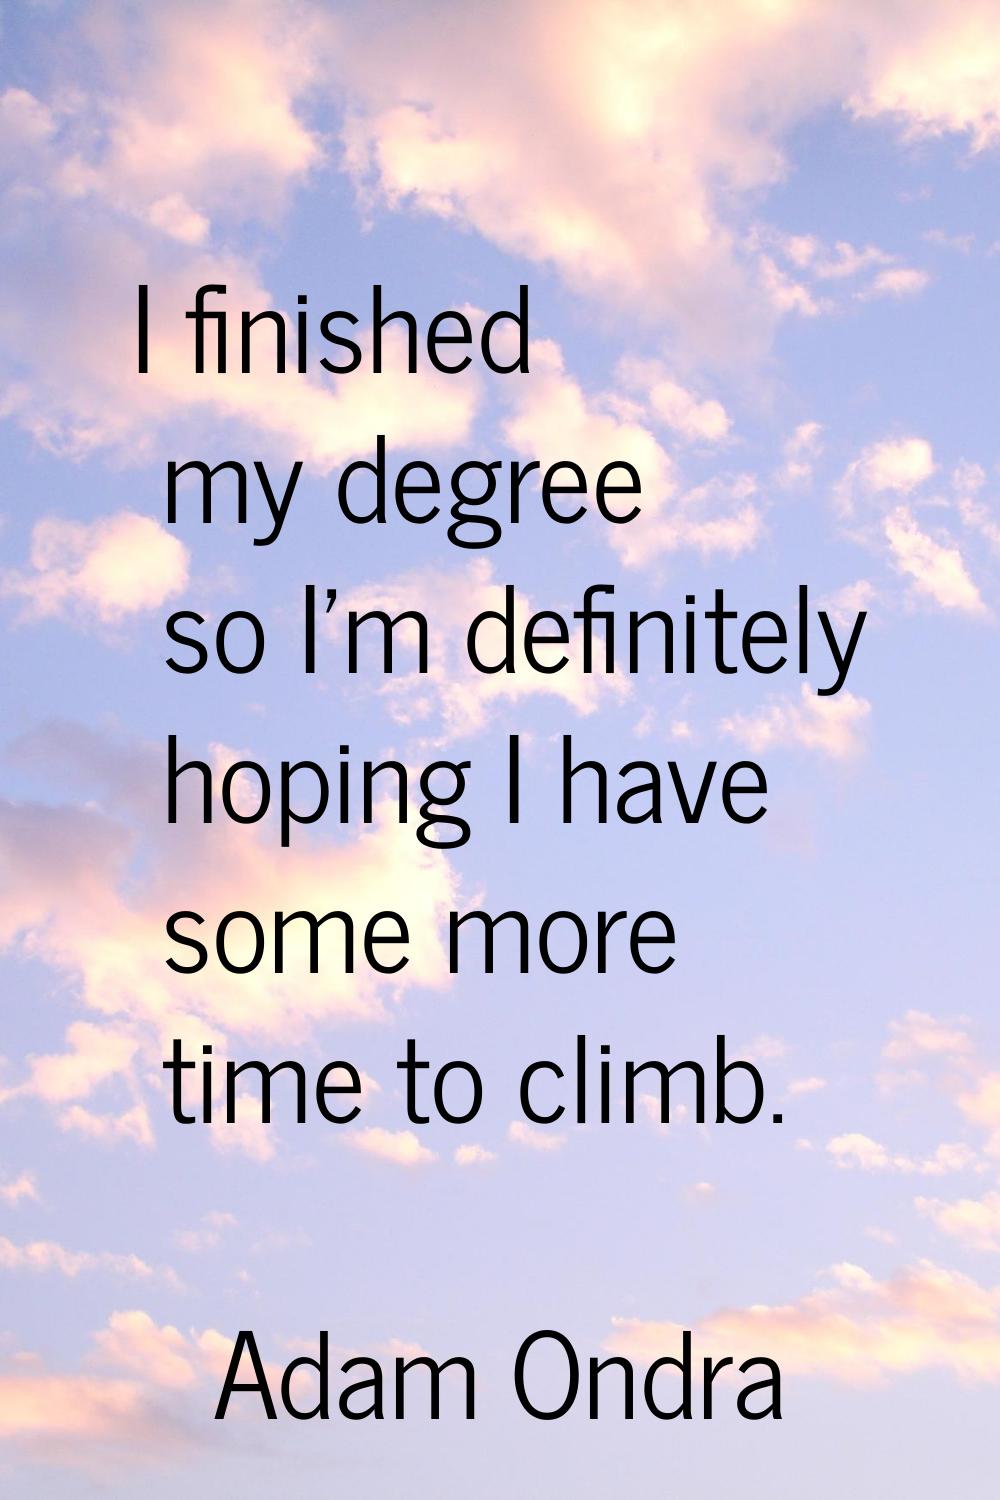 I finished my degree so I'm definitely hoping I have some more time to climb.